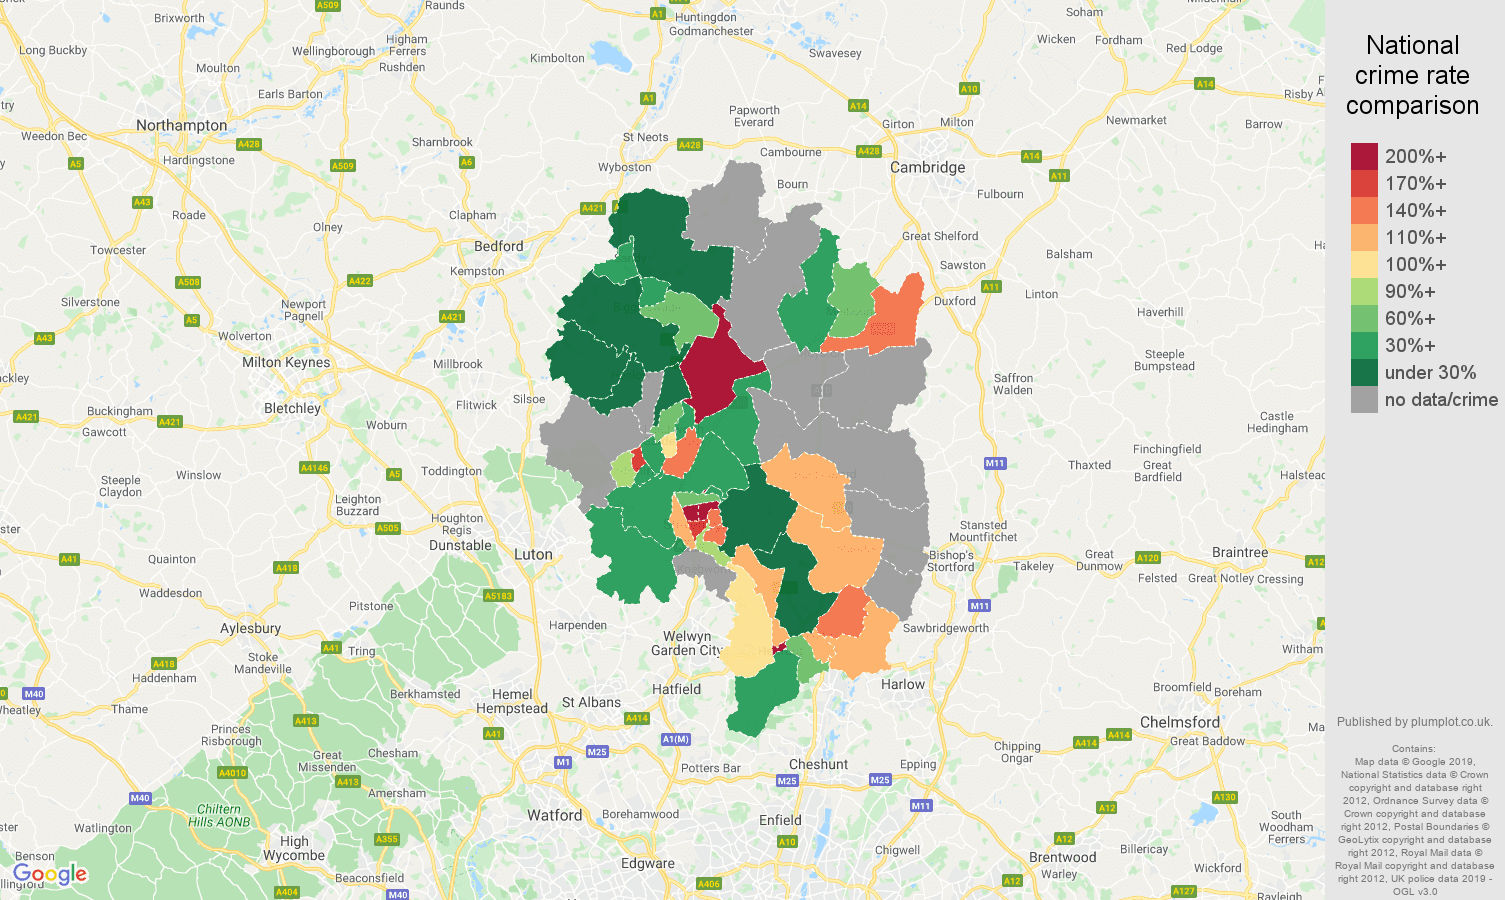 Stevenage possession of weapons crime rate comparison map